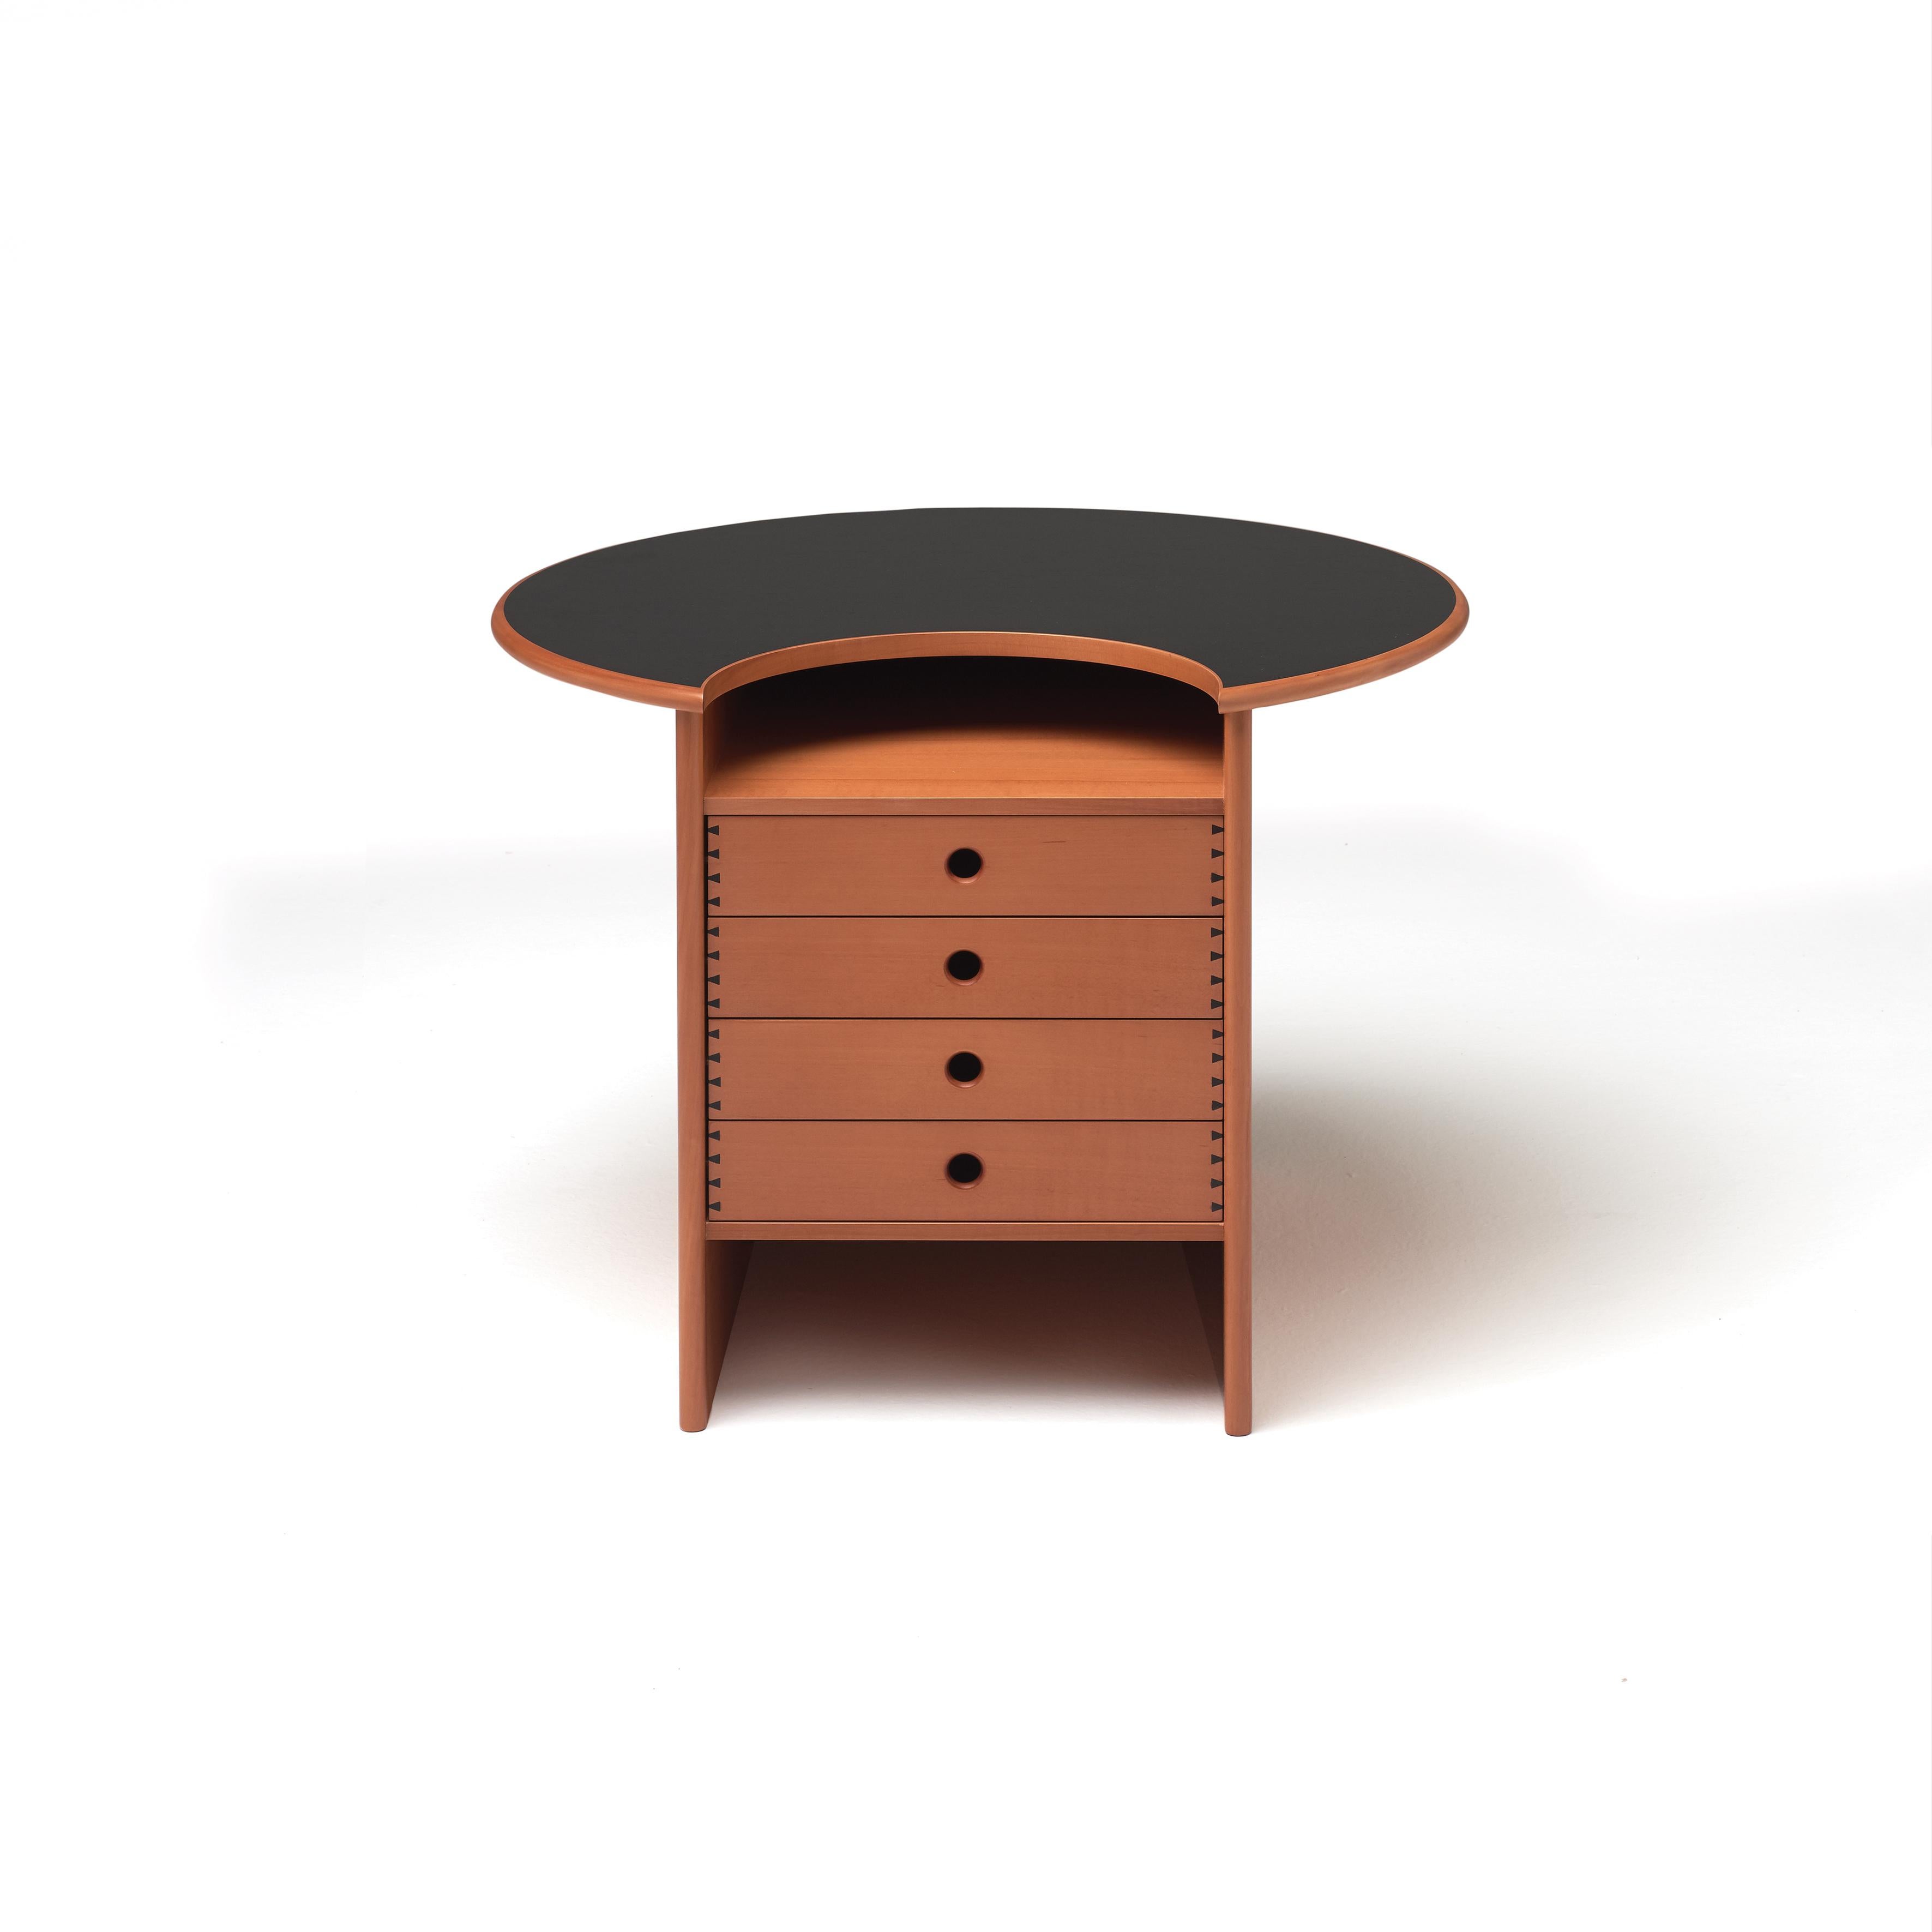 The harmonious and distinctive forms of this small storage unit earned it a place in New York’s MoMA.A space on the front separates four drawers assembled with dovetail joints, that are removable and finished like trays, from the semi-circular